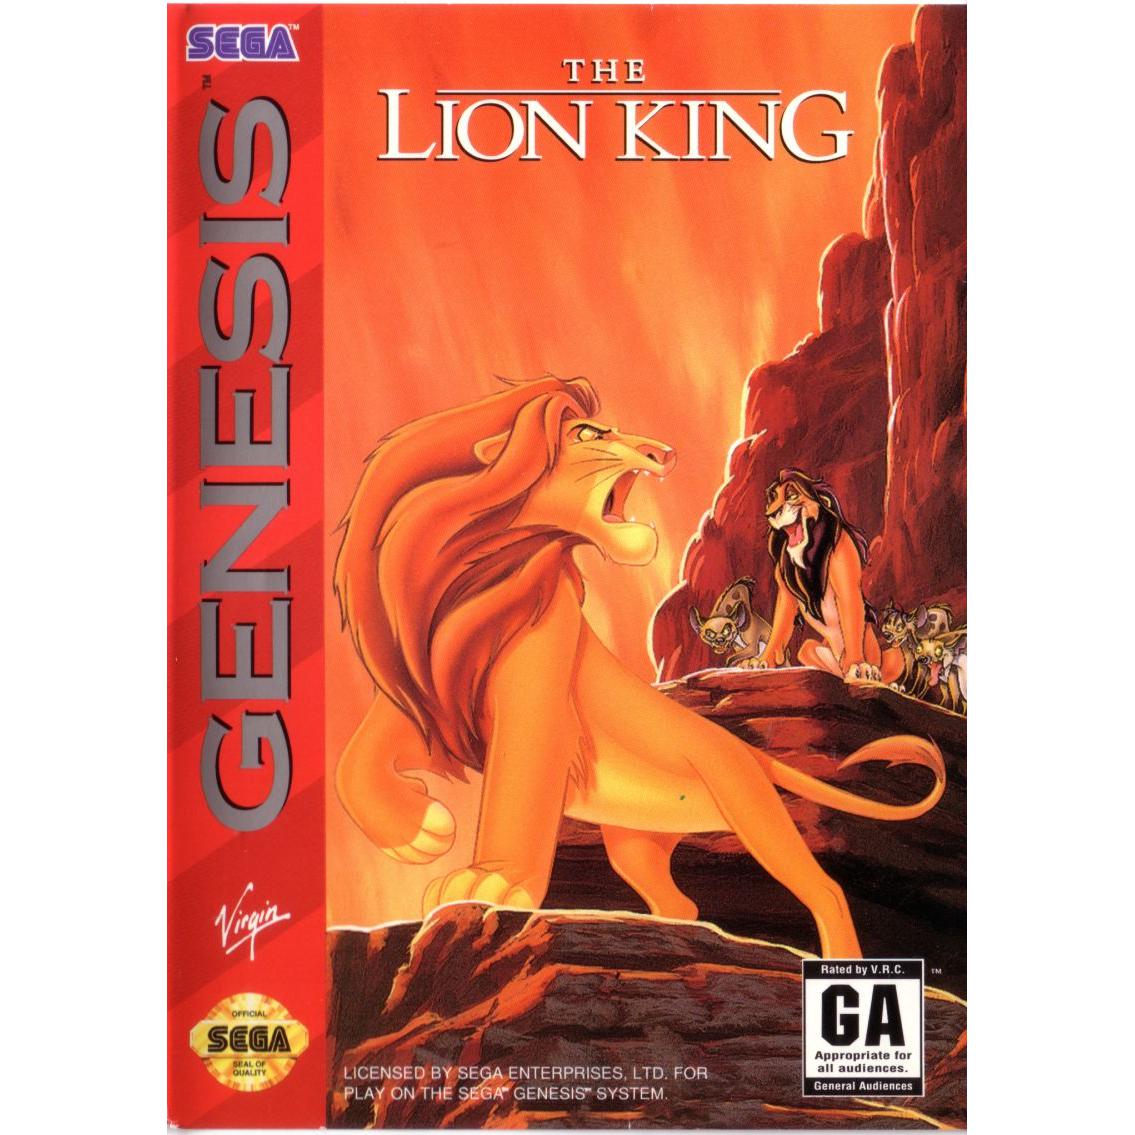 The Lion King - Sega Genesis Game Complete - YourGamingShop.com - Buy, Sell, Trade Video Games Online. 120 Day Warranty. Satisfaction Guaranteed.